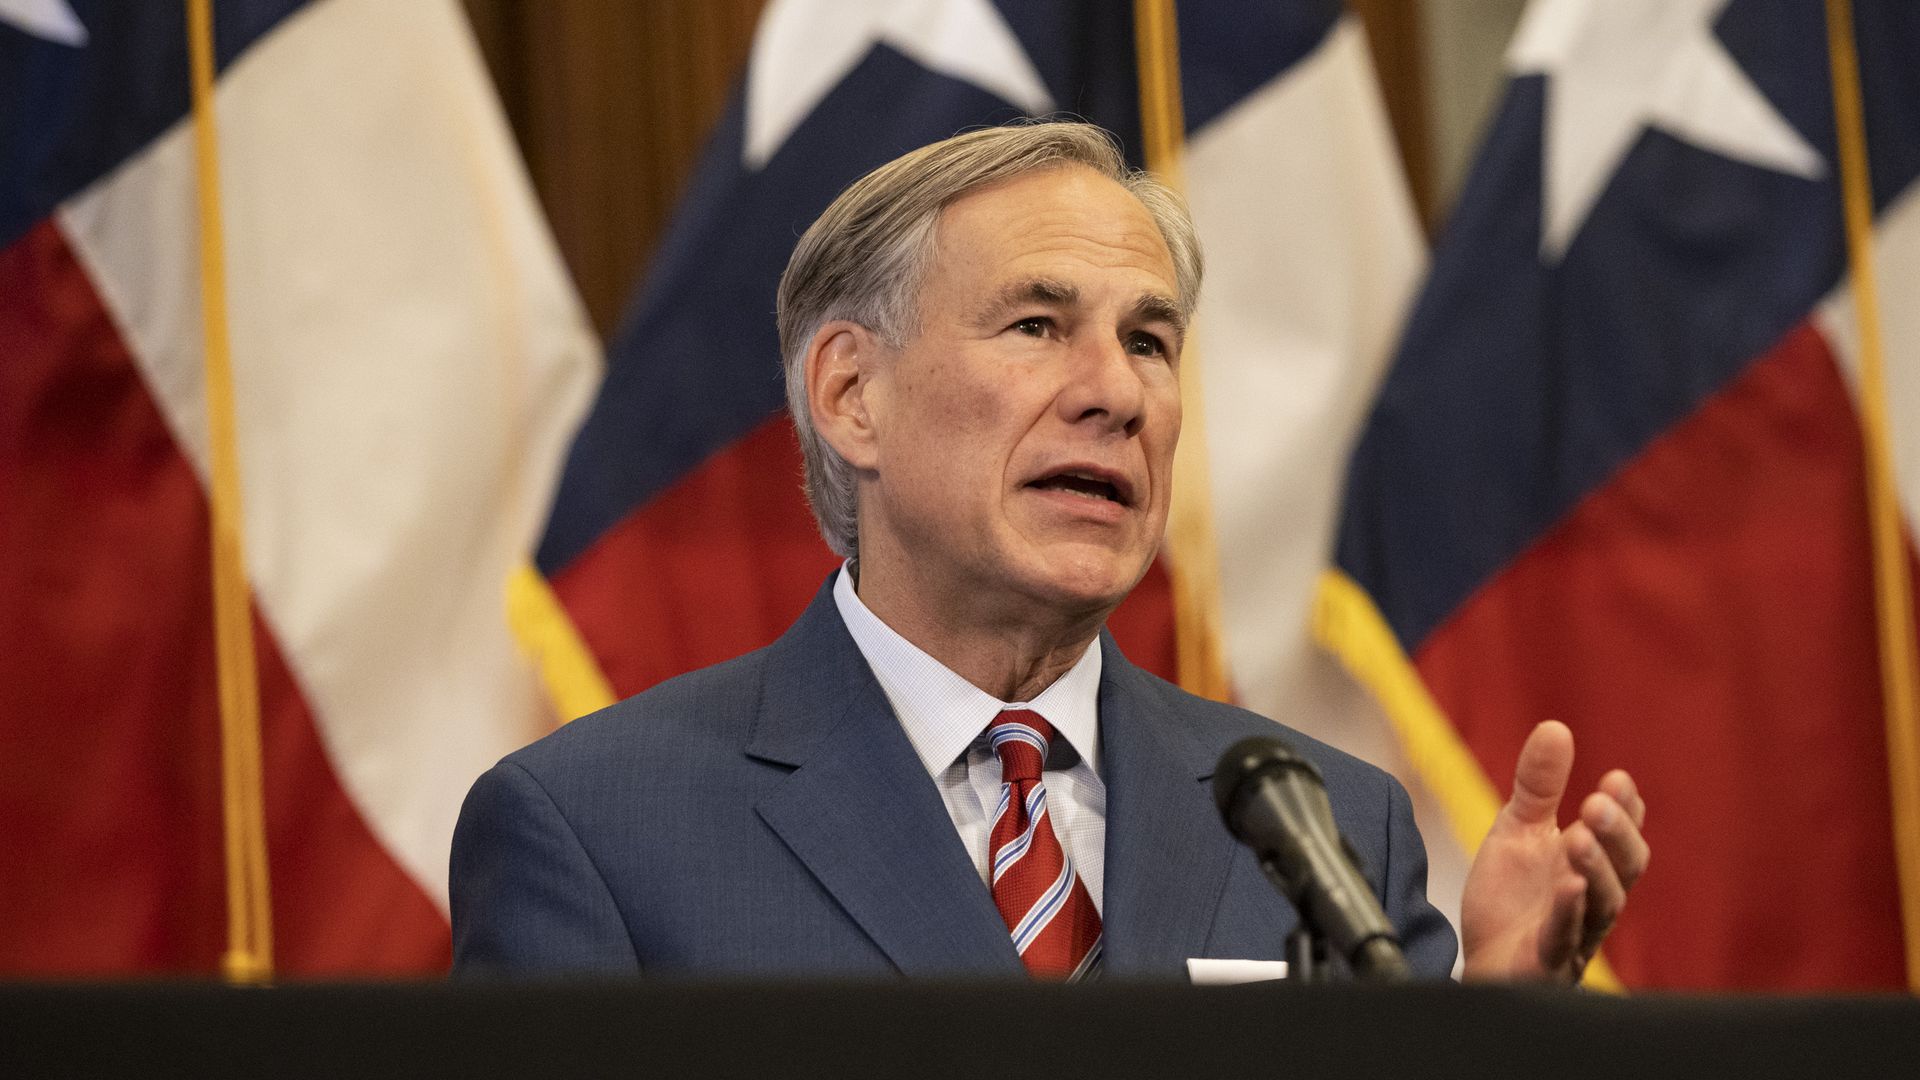 Photo of Greg Abbott in a suit speaking and gesturing with one hand